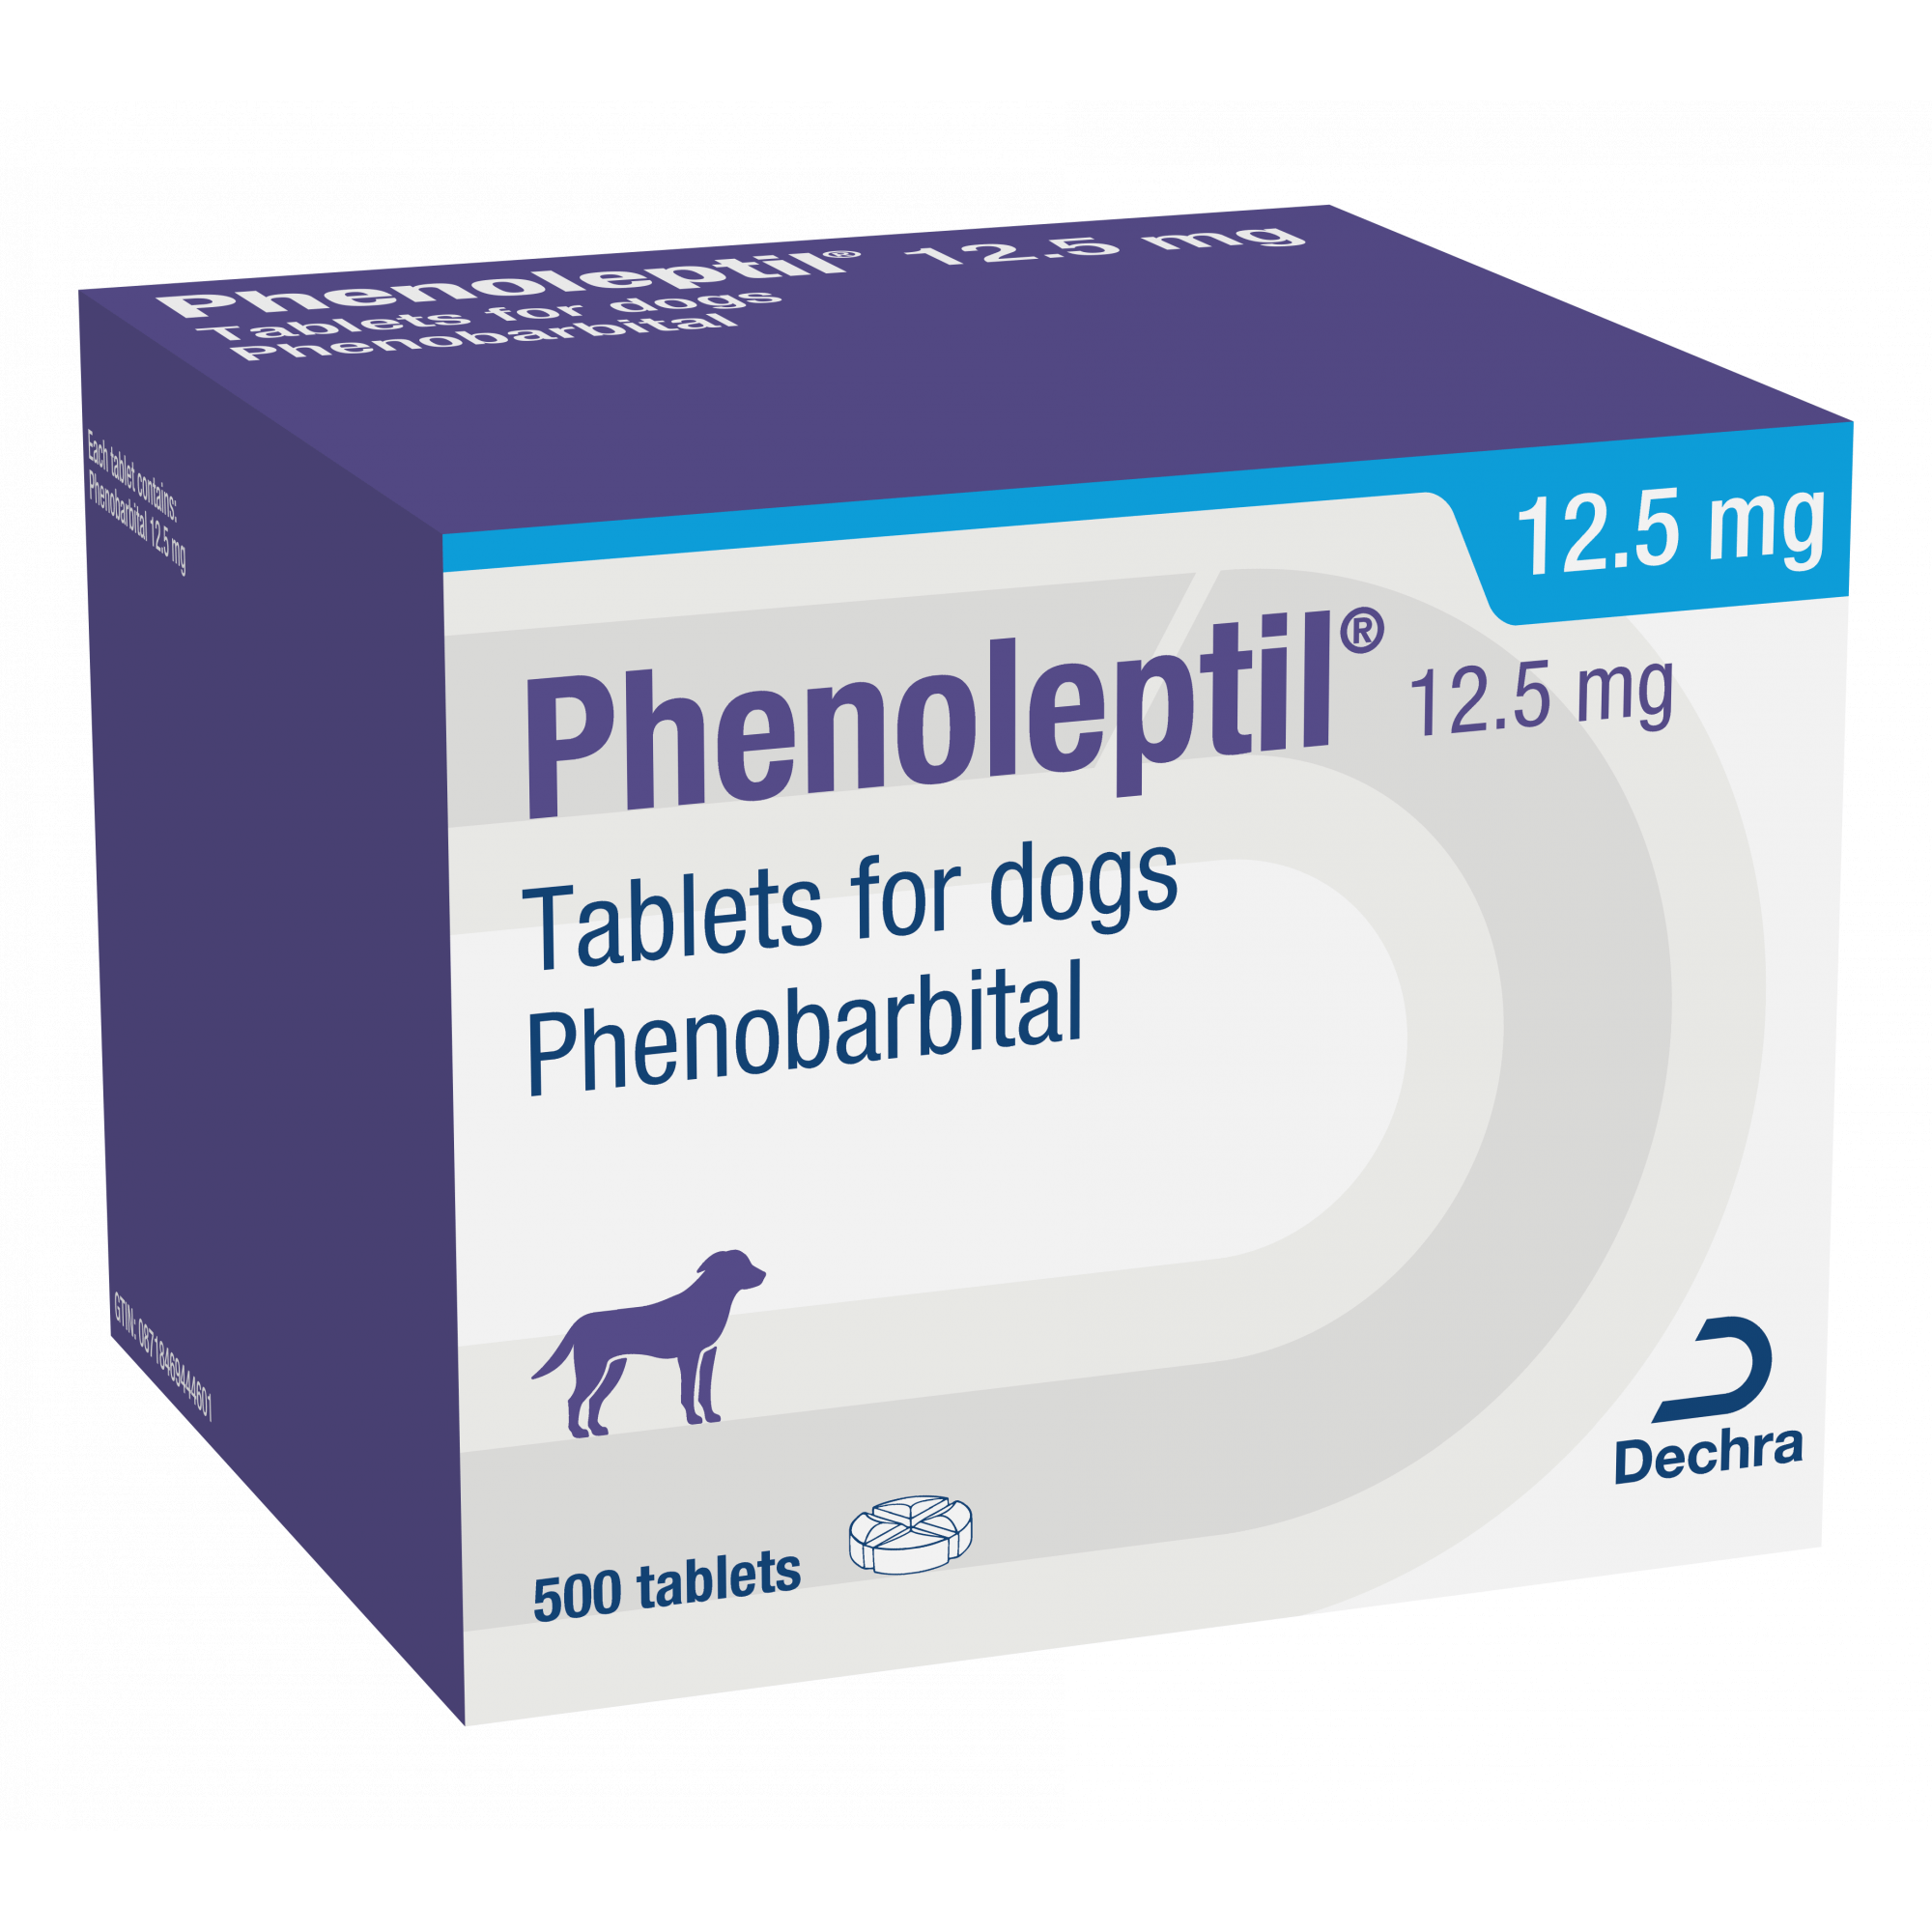 Phenoleptil Tablets for Dogs